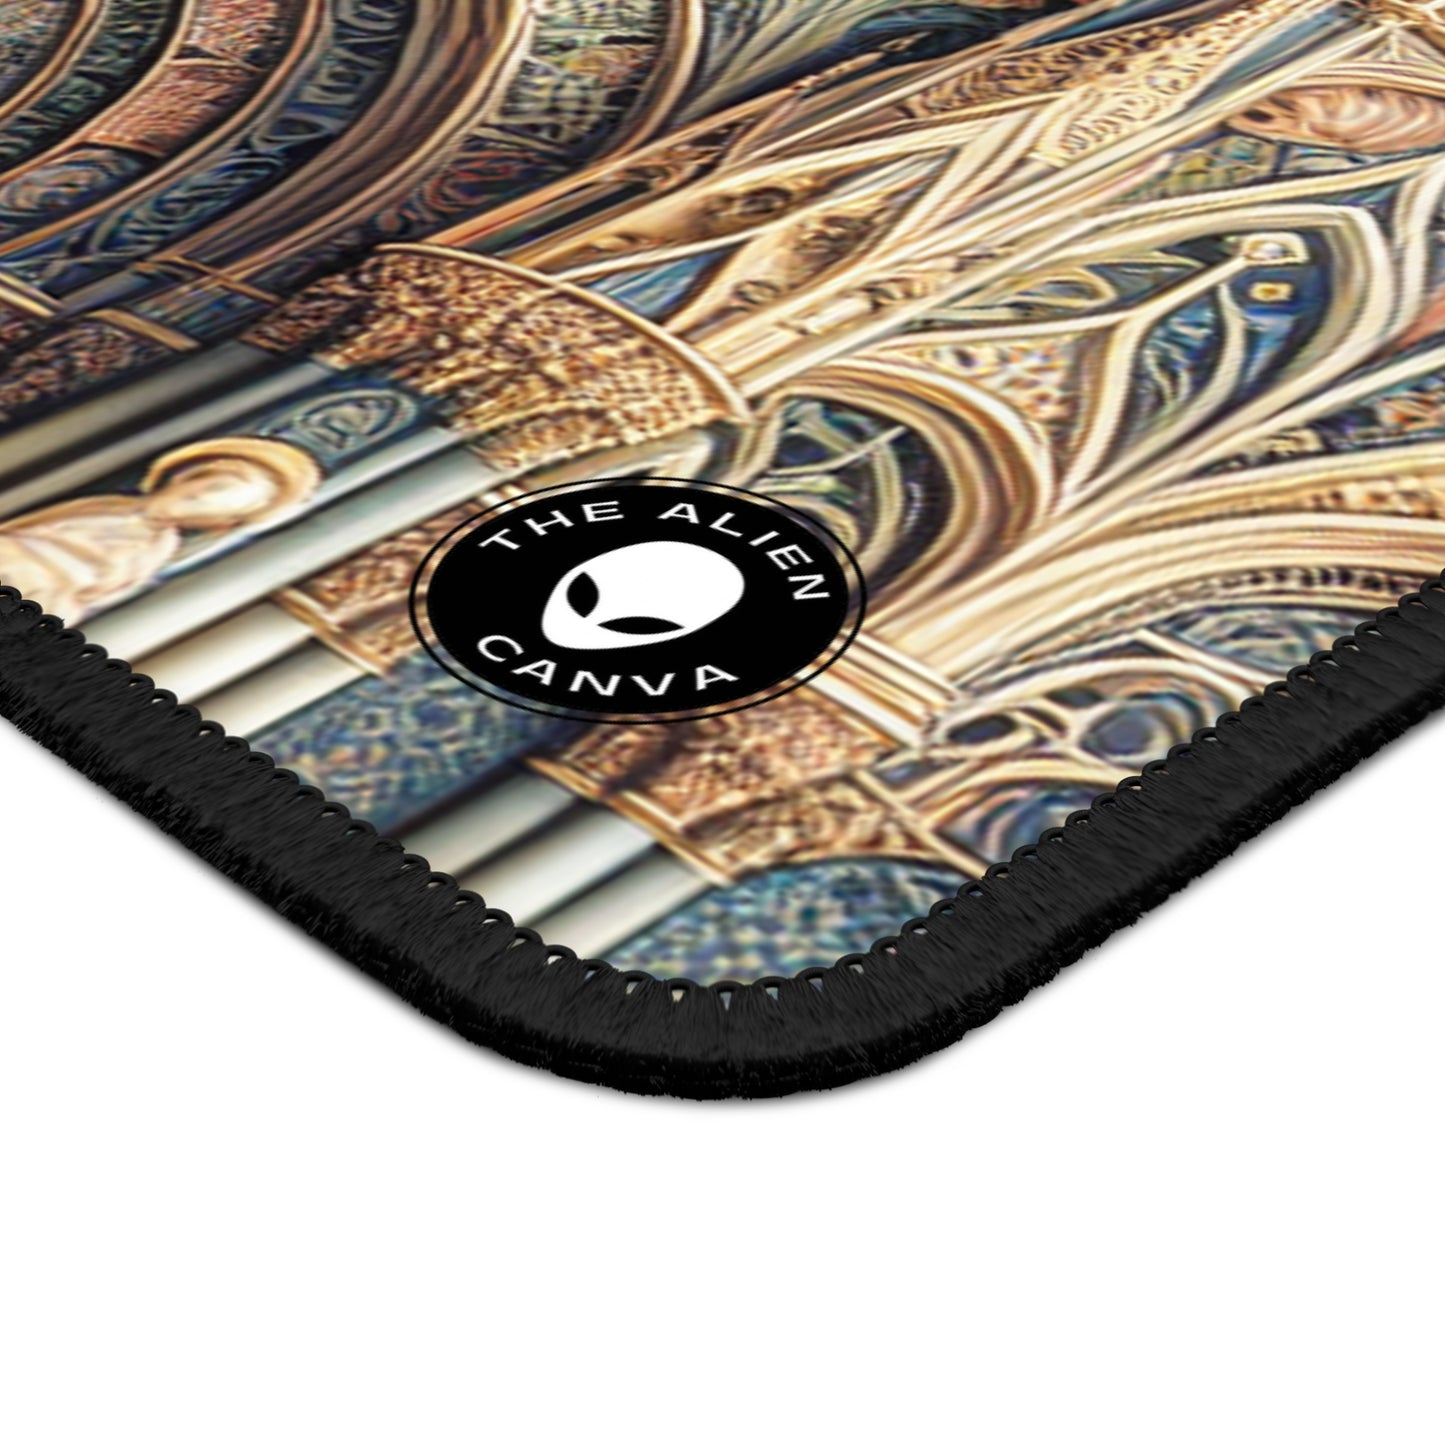 "Harmony of Angels: Celestial Serenade at Dusk" - The Alien Gaming Mouse Pad International Gothic